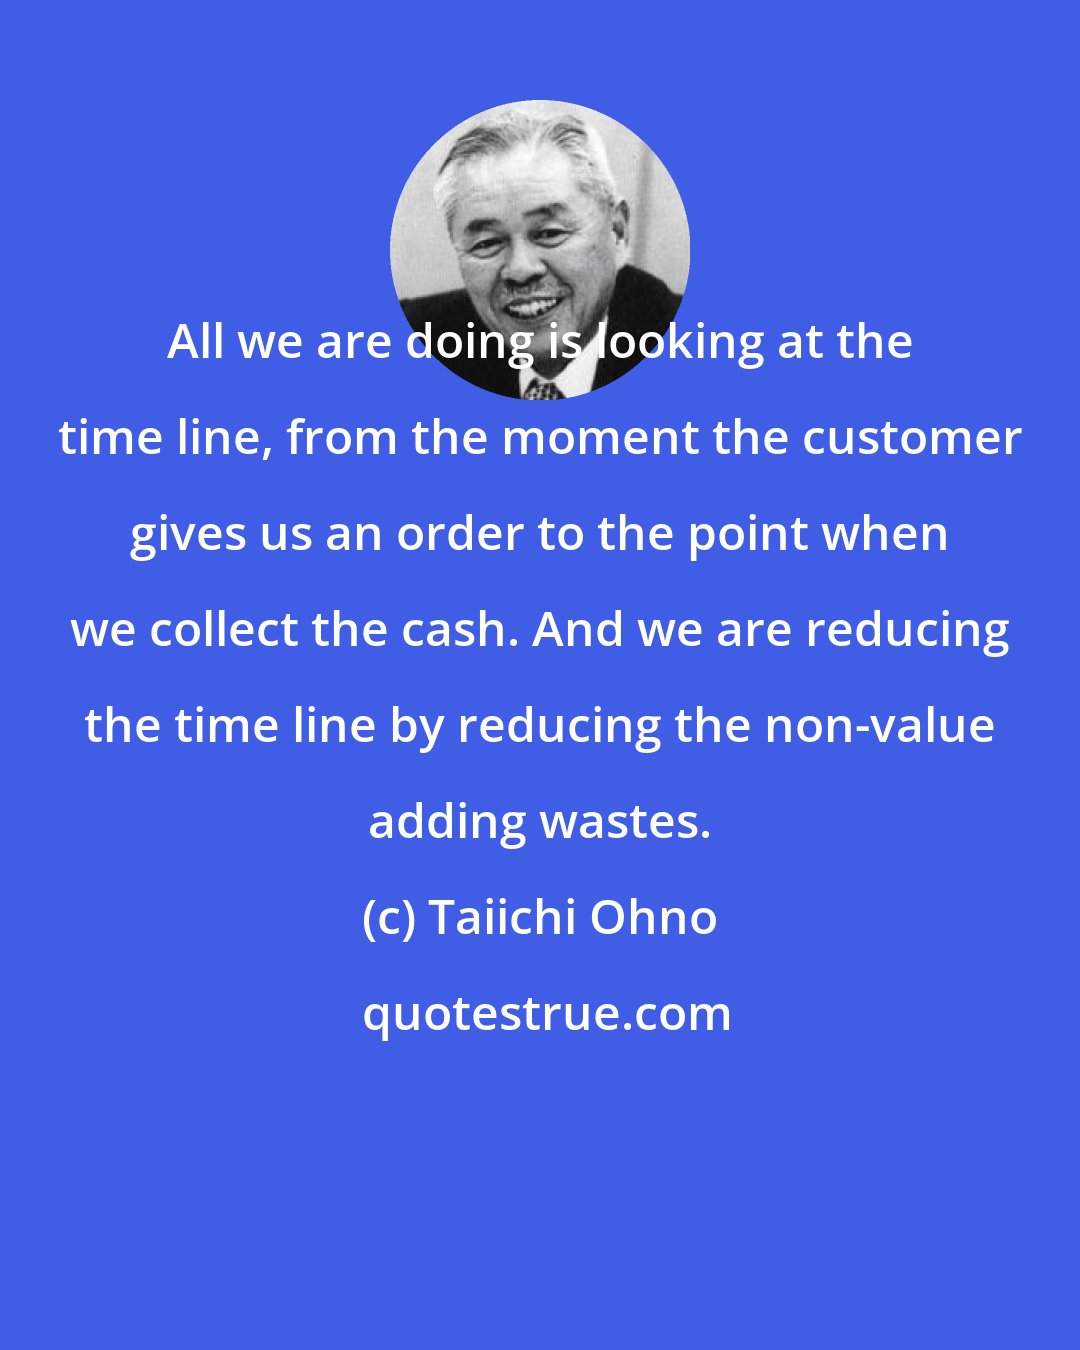 Taiichi Ohno: All we are doing is looking at the time line, from the moment the customer gives us an order to the point when we collect the cash. And we are reducing the time line by reducing the non-value adding wastes.